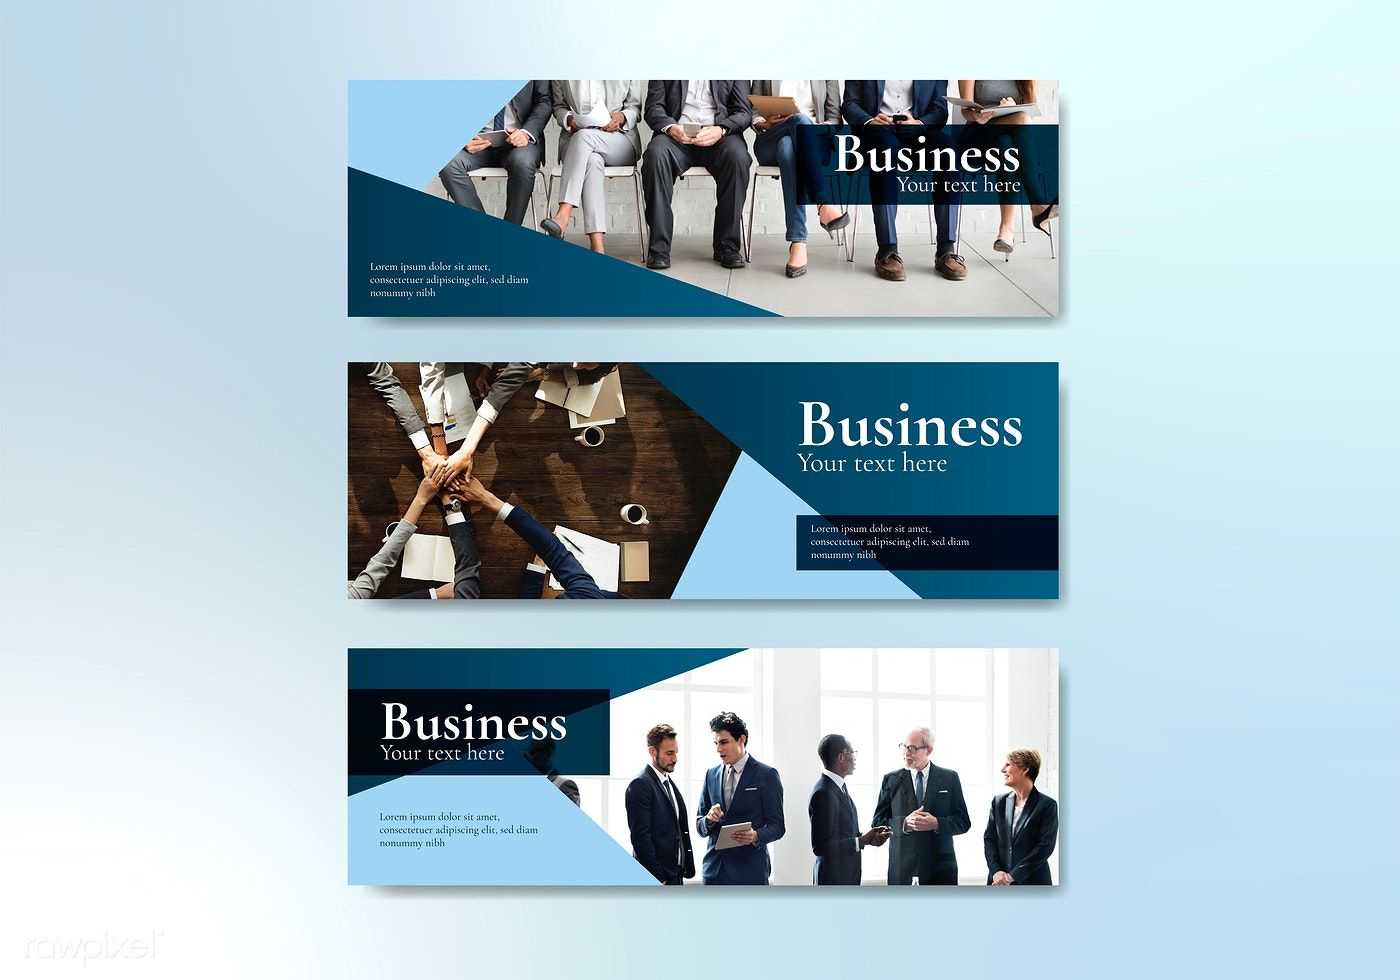 Business Website Banner Design Vector | Free Image Pertaining To Photography Banner Template